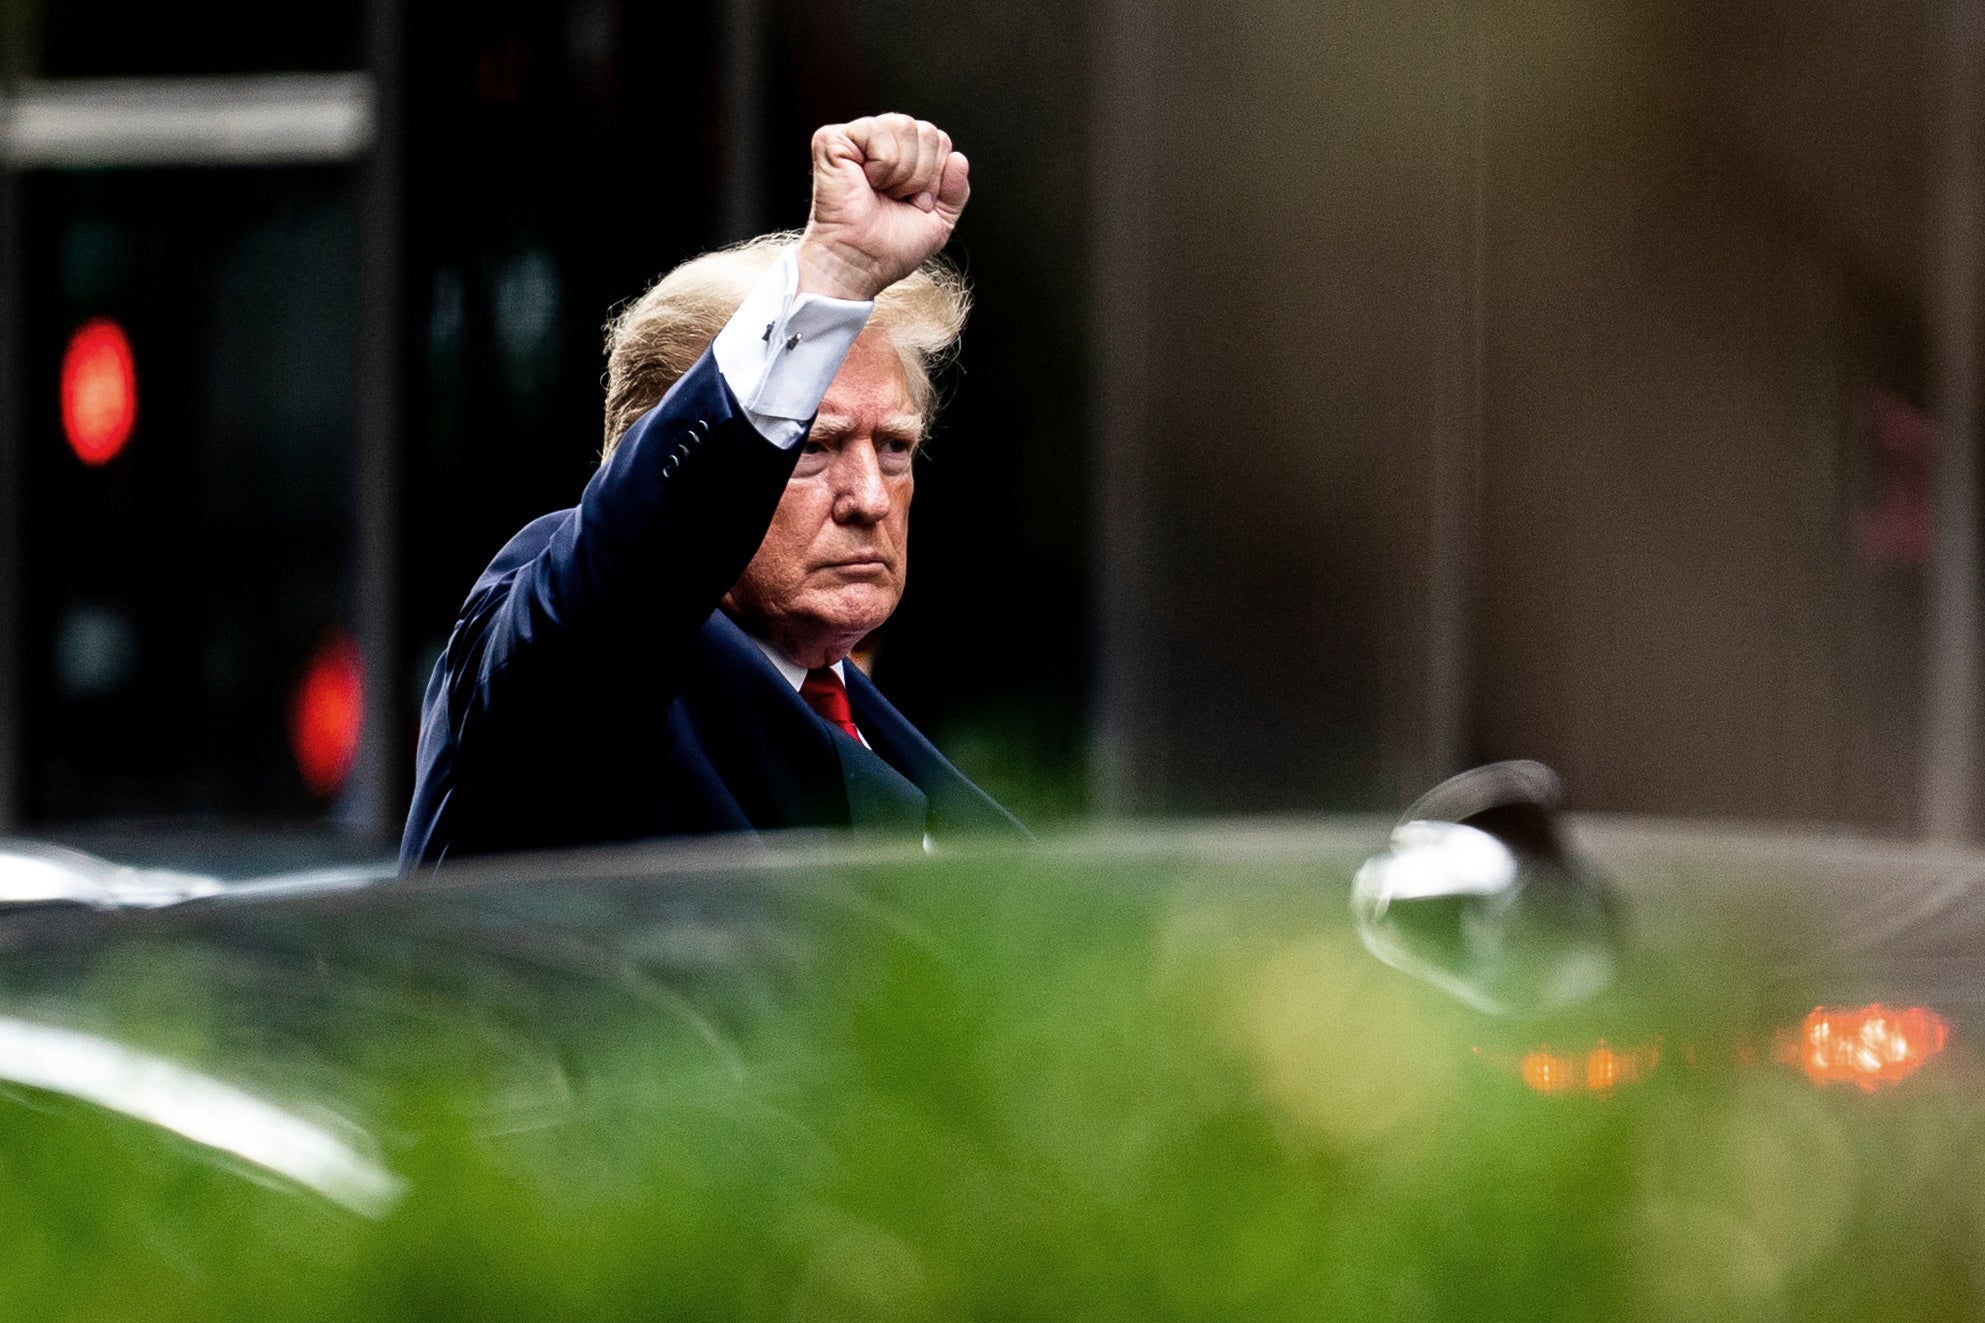 Donald Trump raises his fist as he departs Trump Tower in New York City on his way to testify before the state attorney general